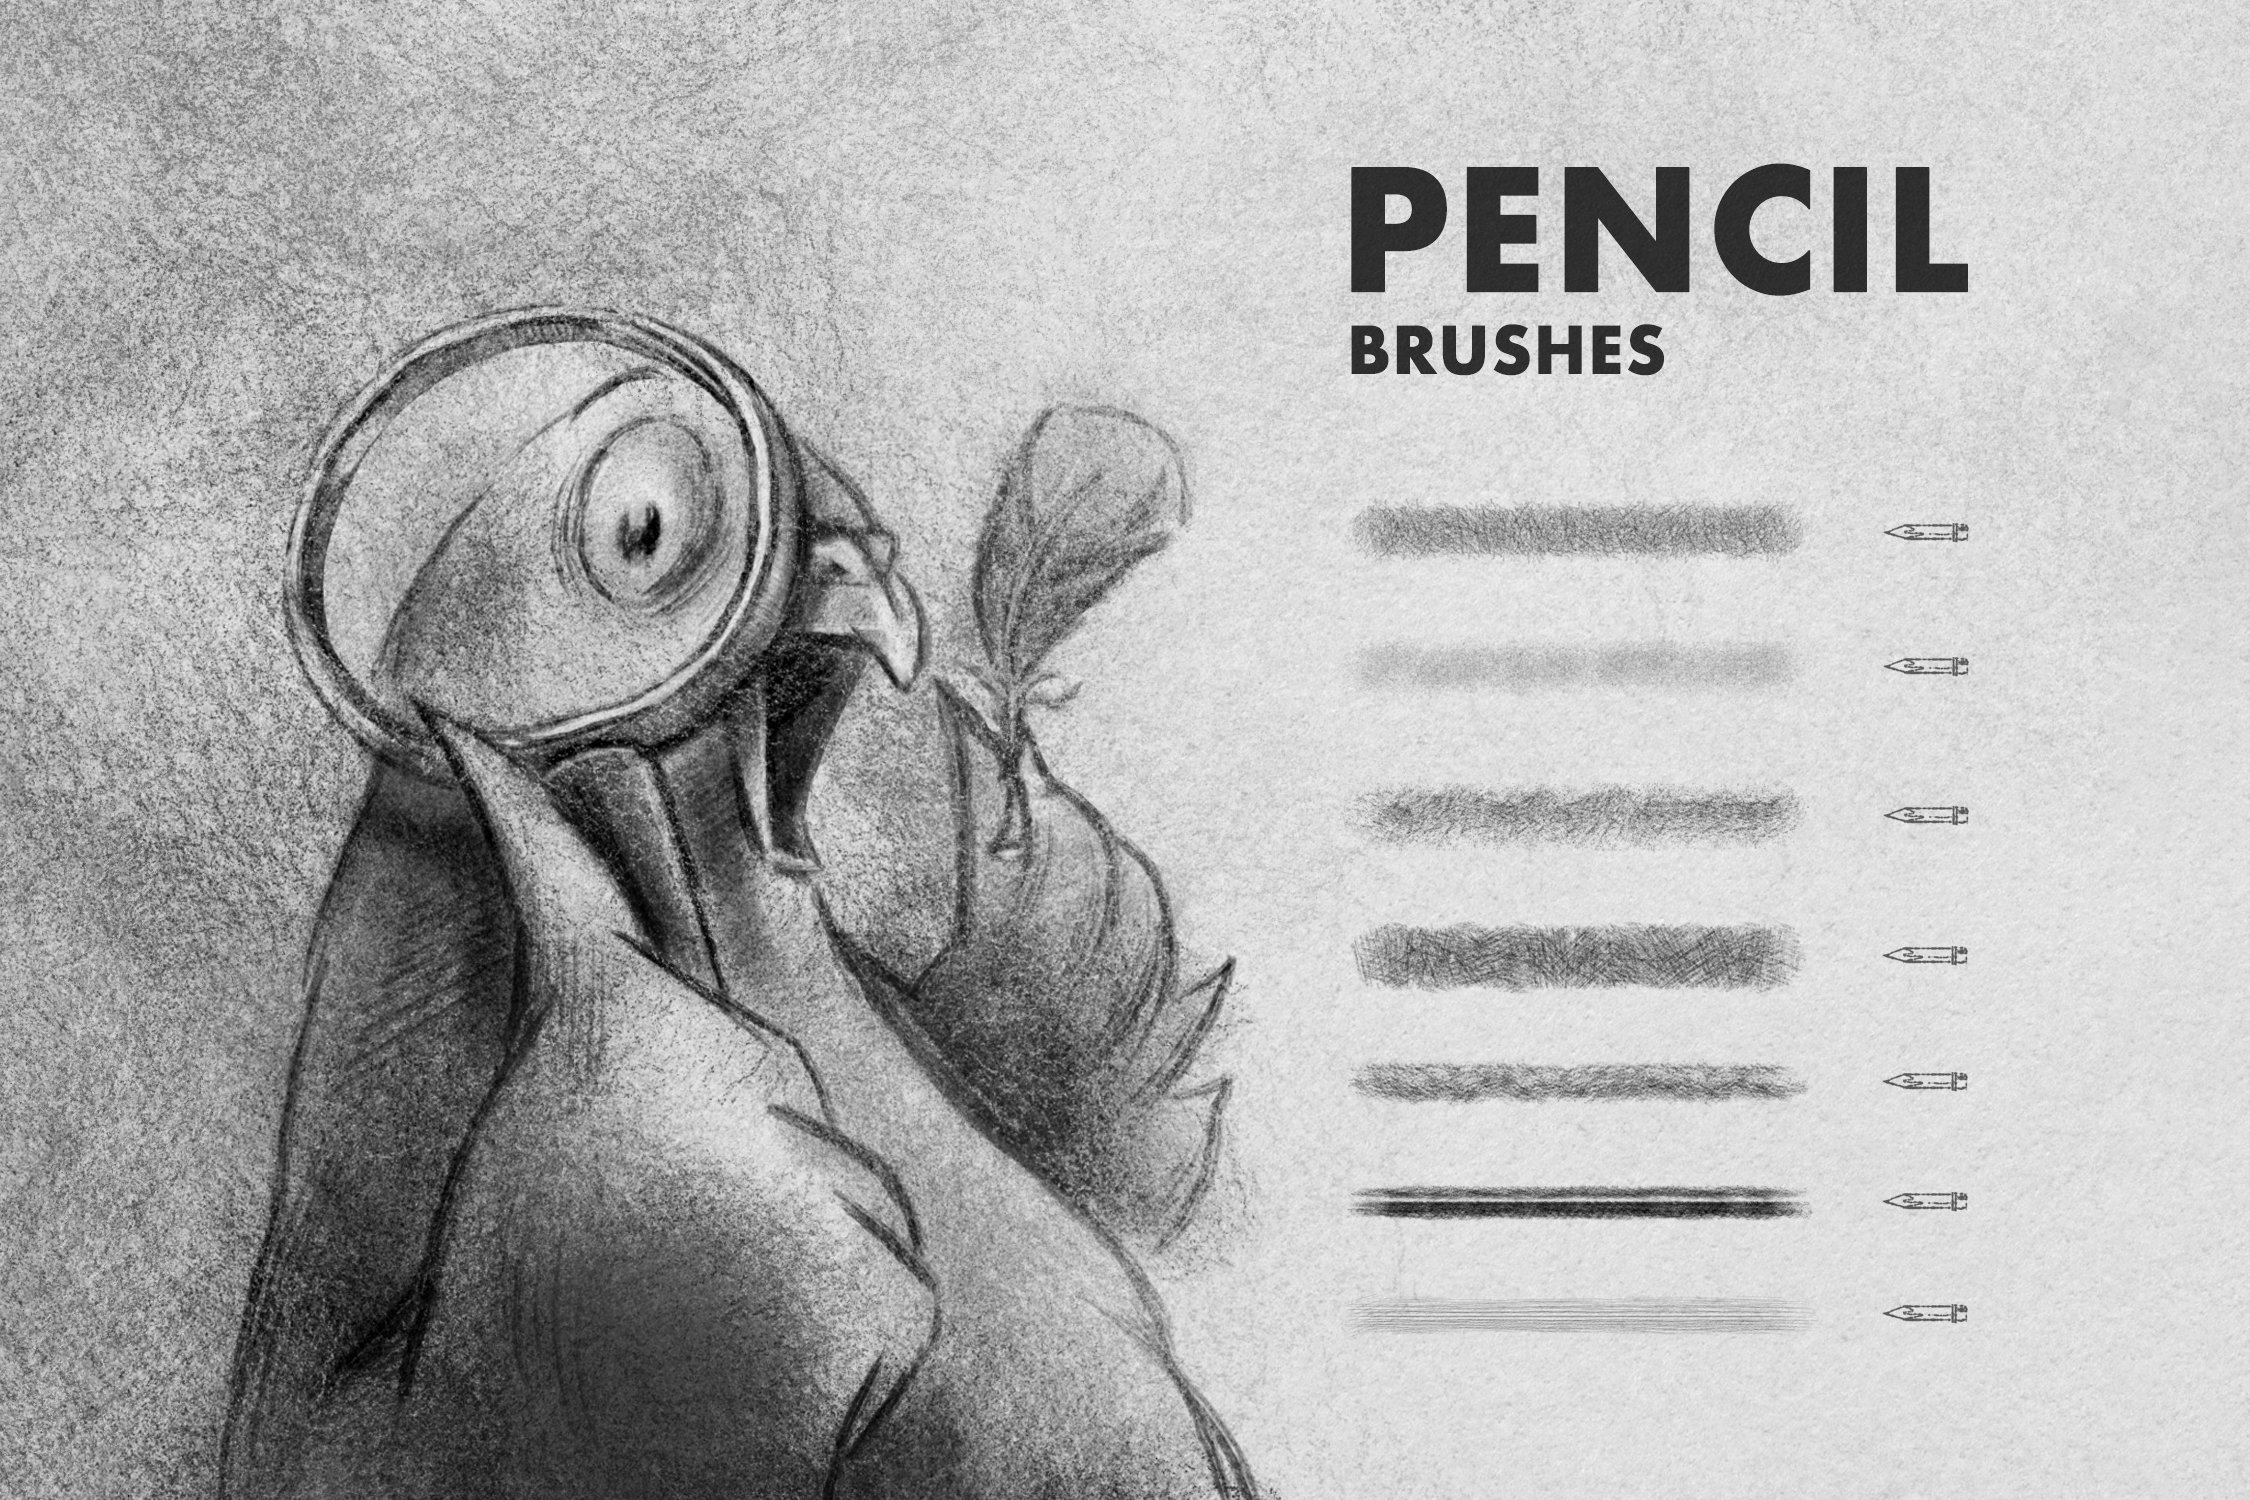 Sketch & Pencil Photoshop Brushespreview image.